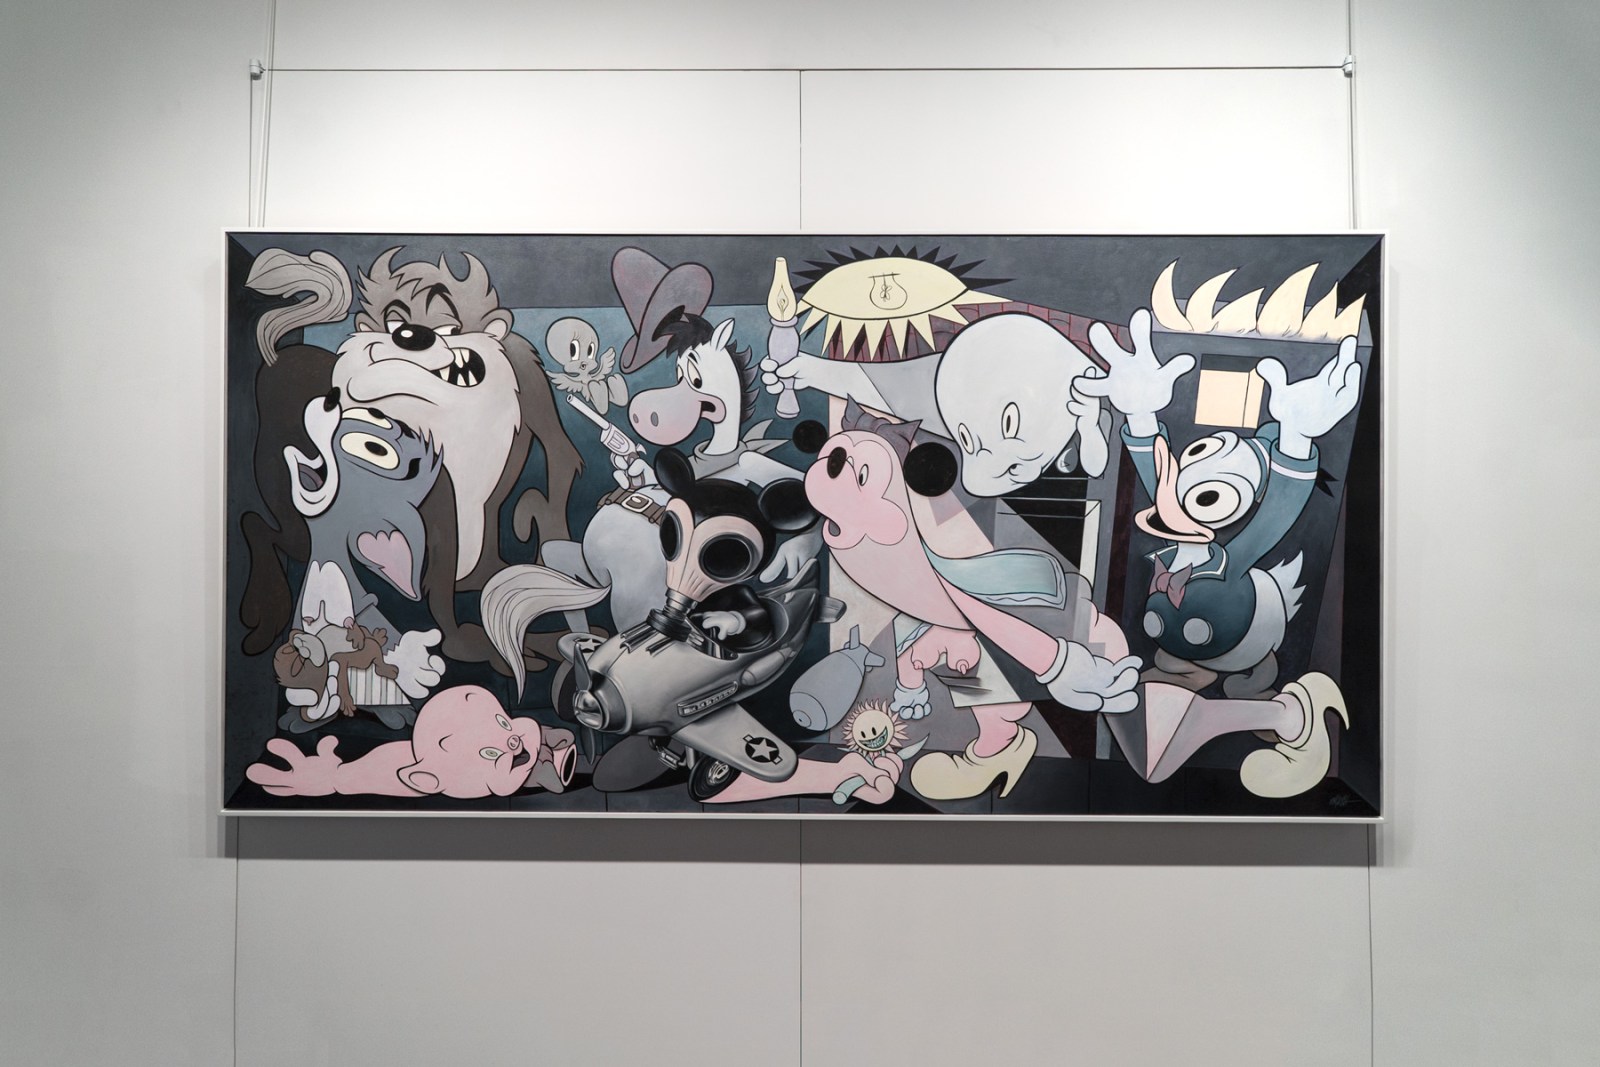 ron-english-on-pablo-picasso-guernica-10